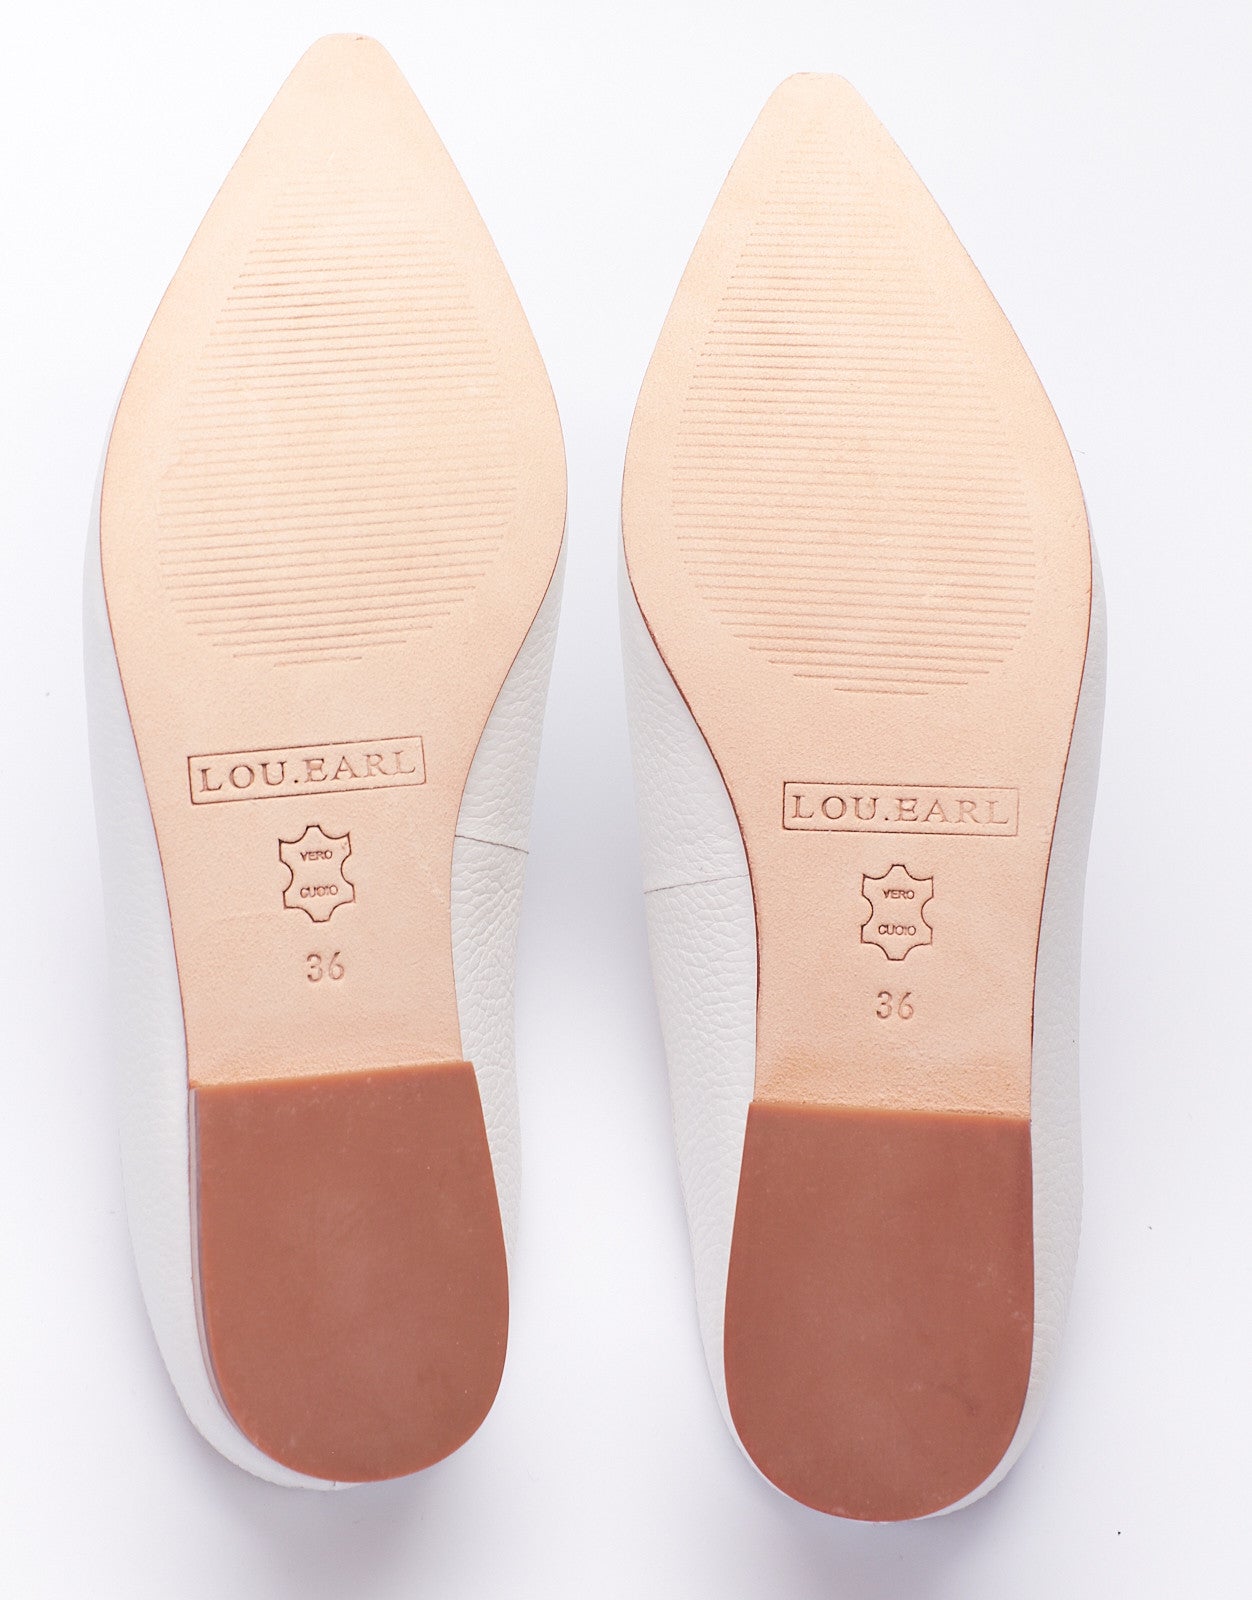 pointed toe slip on mules for women with a leather sole and tumbled leather upper.